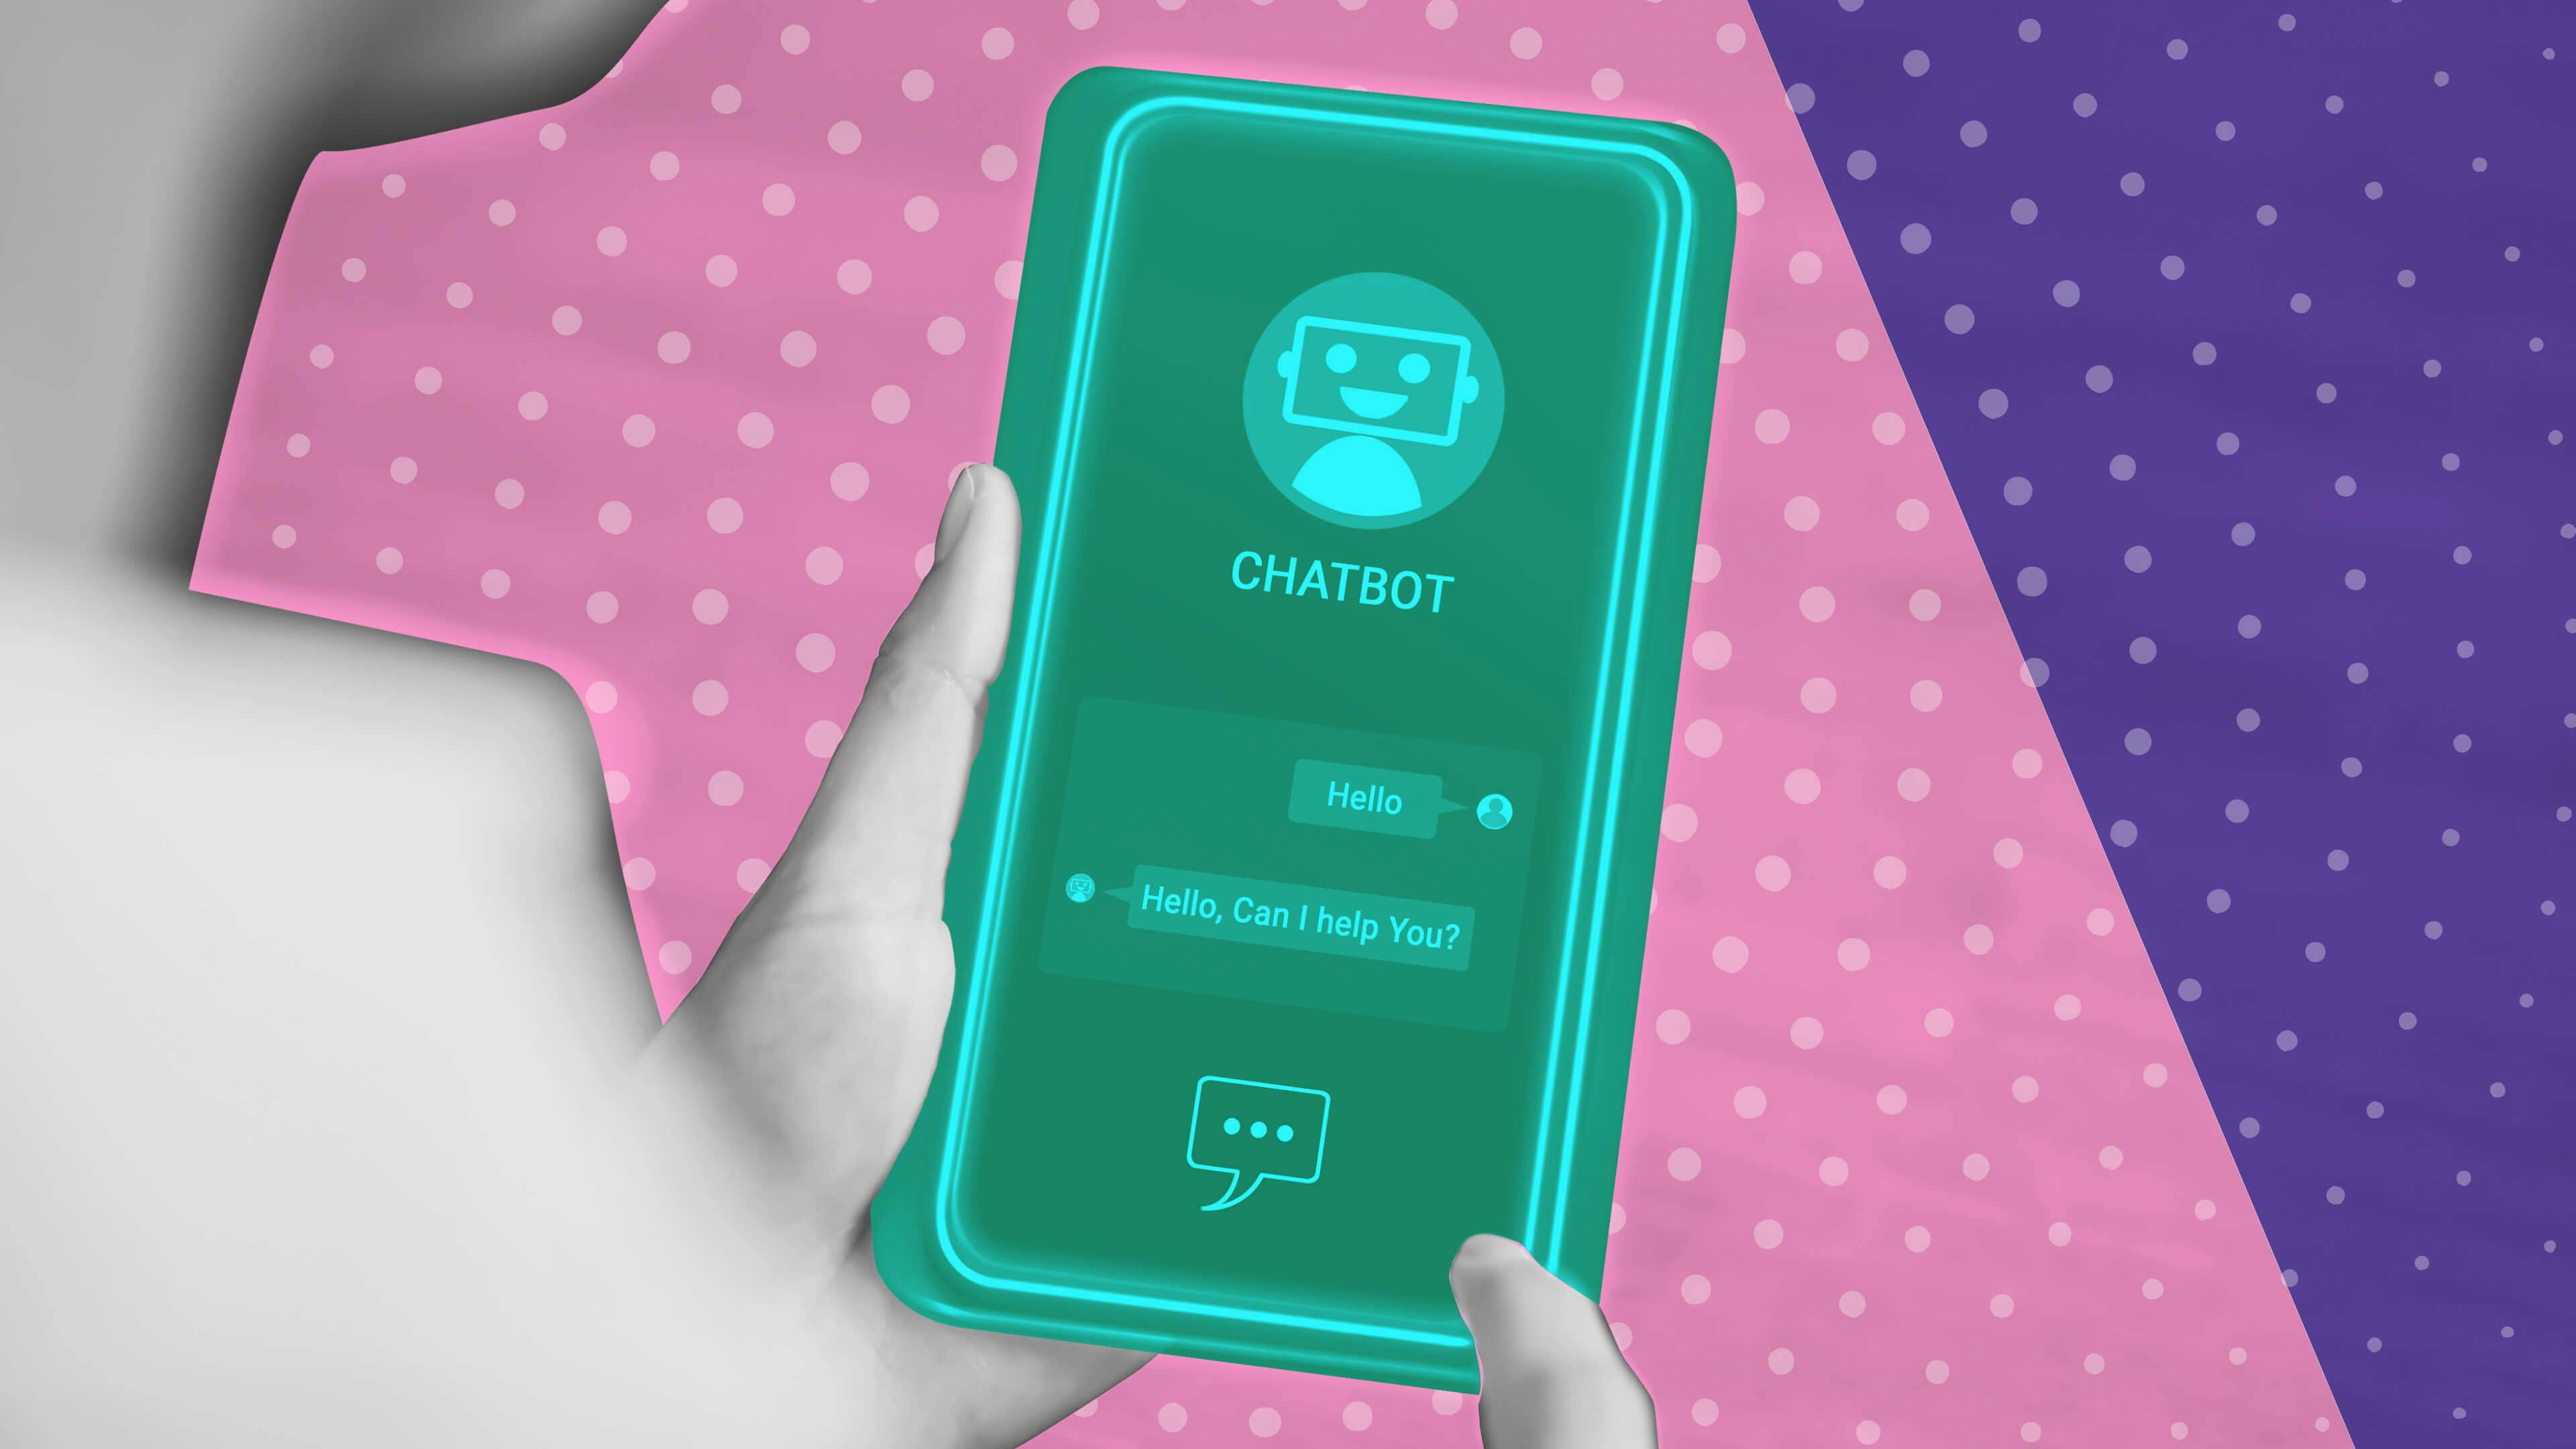 No one wants a chatbot: Using AI to solve root problems